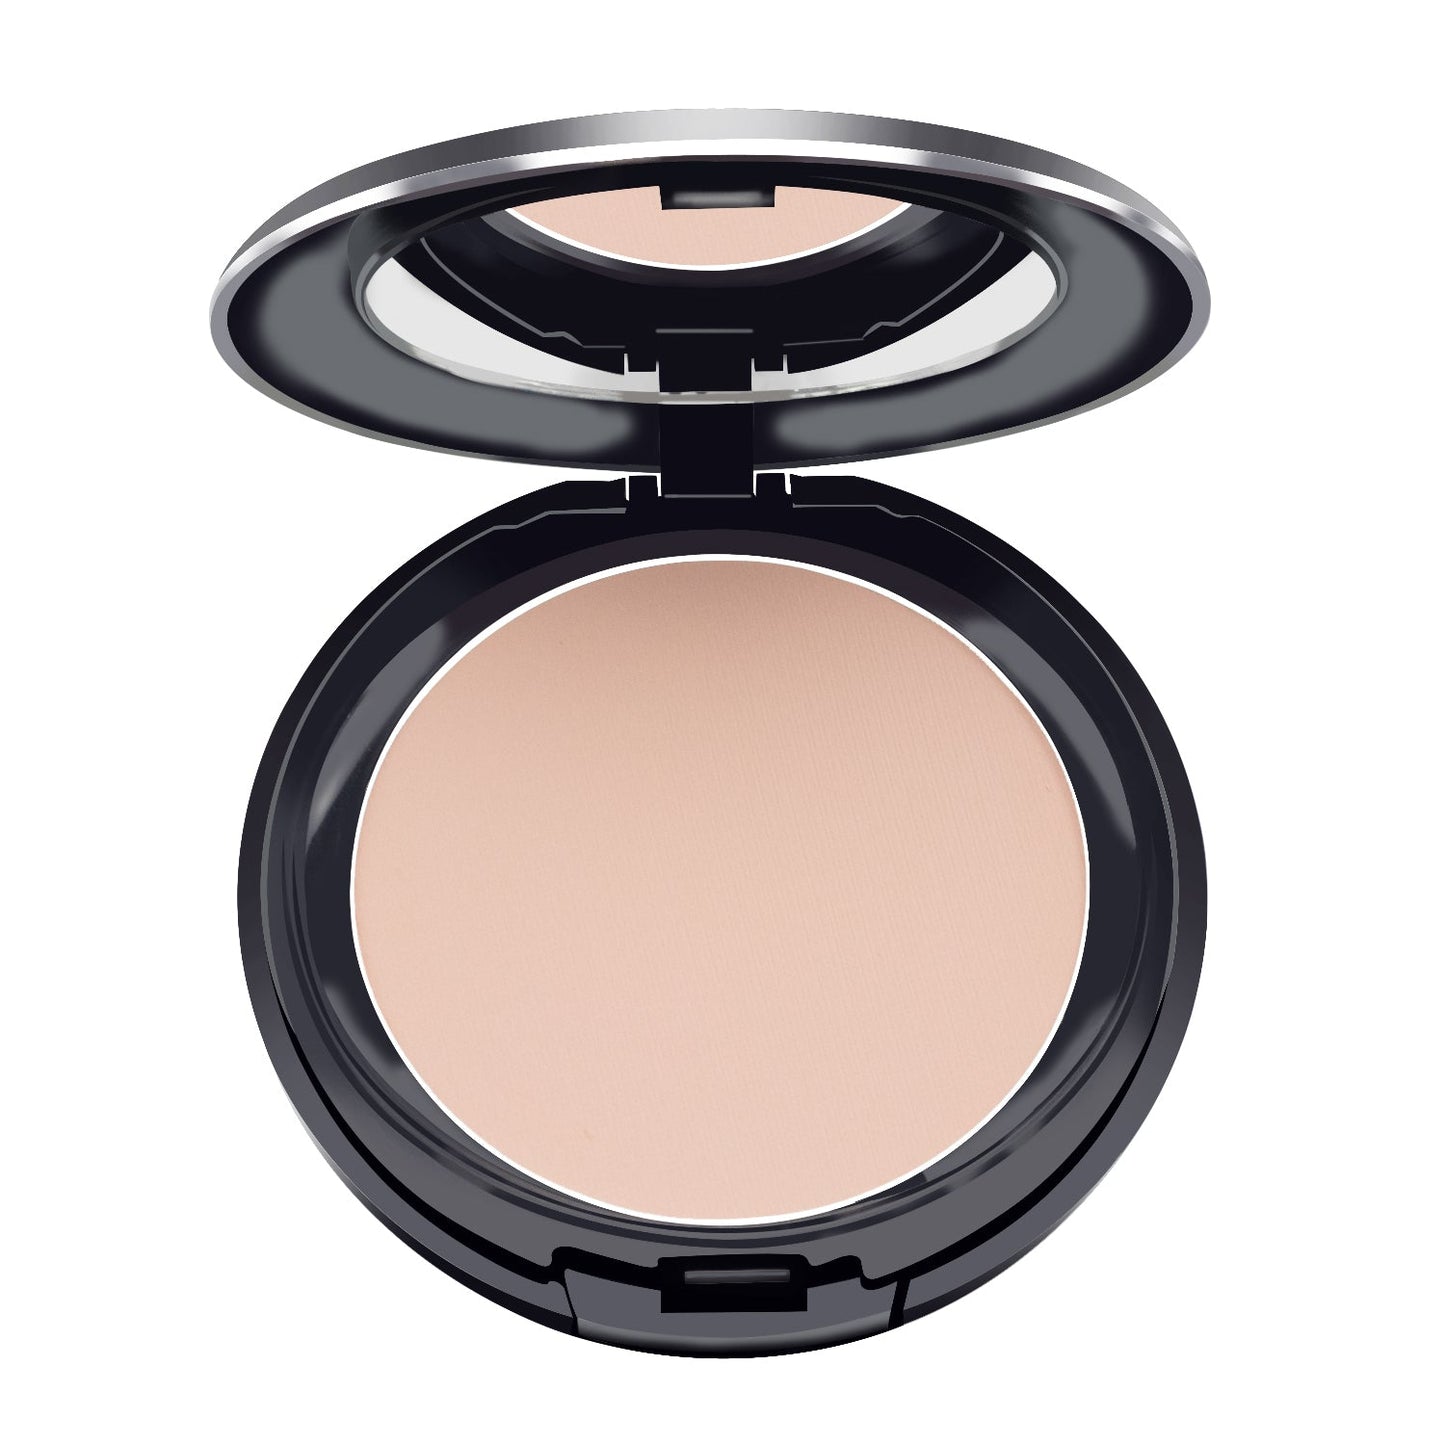 Glamgals Hollywood-U.S.A 3 In 1 Three Way Cake Compact Makeup+ Foundation + Concealer SPF 15, (Light Beige) - BUDNE